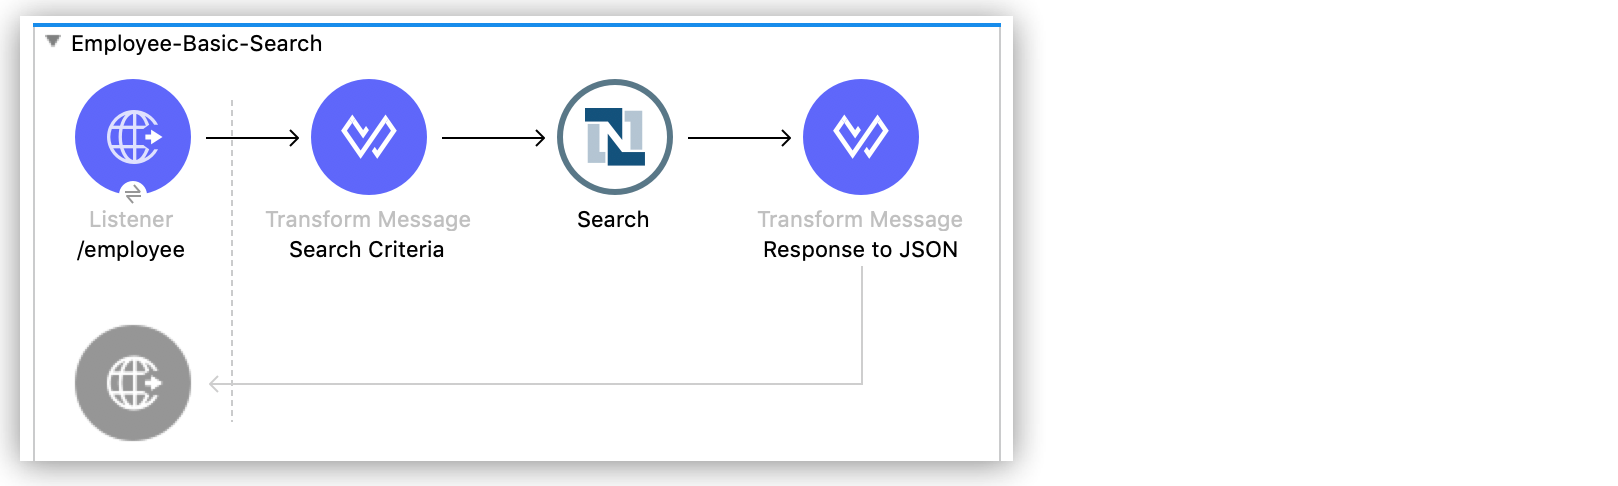 App flow for the Employee basic search example